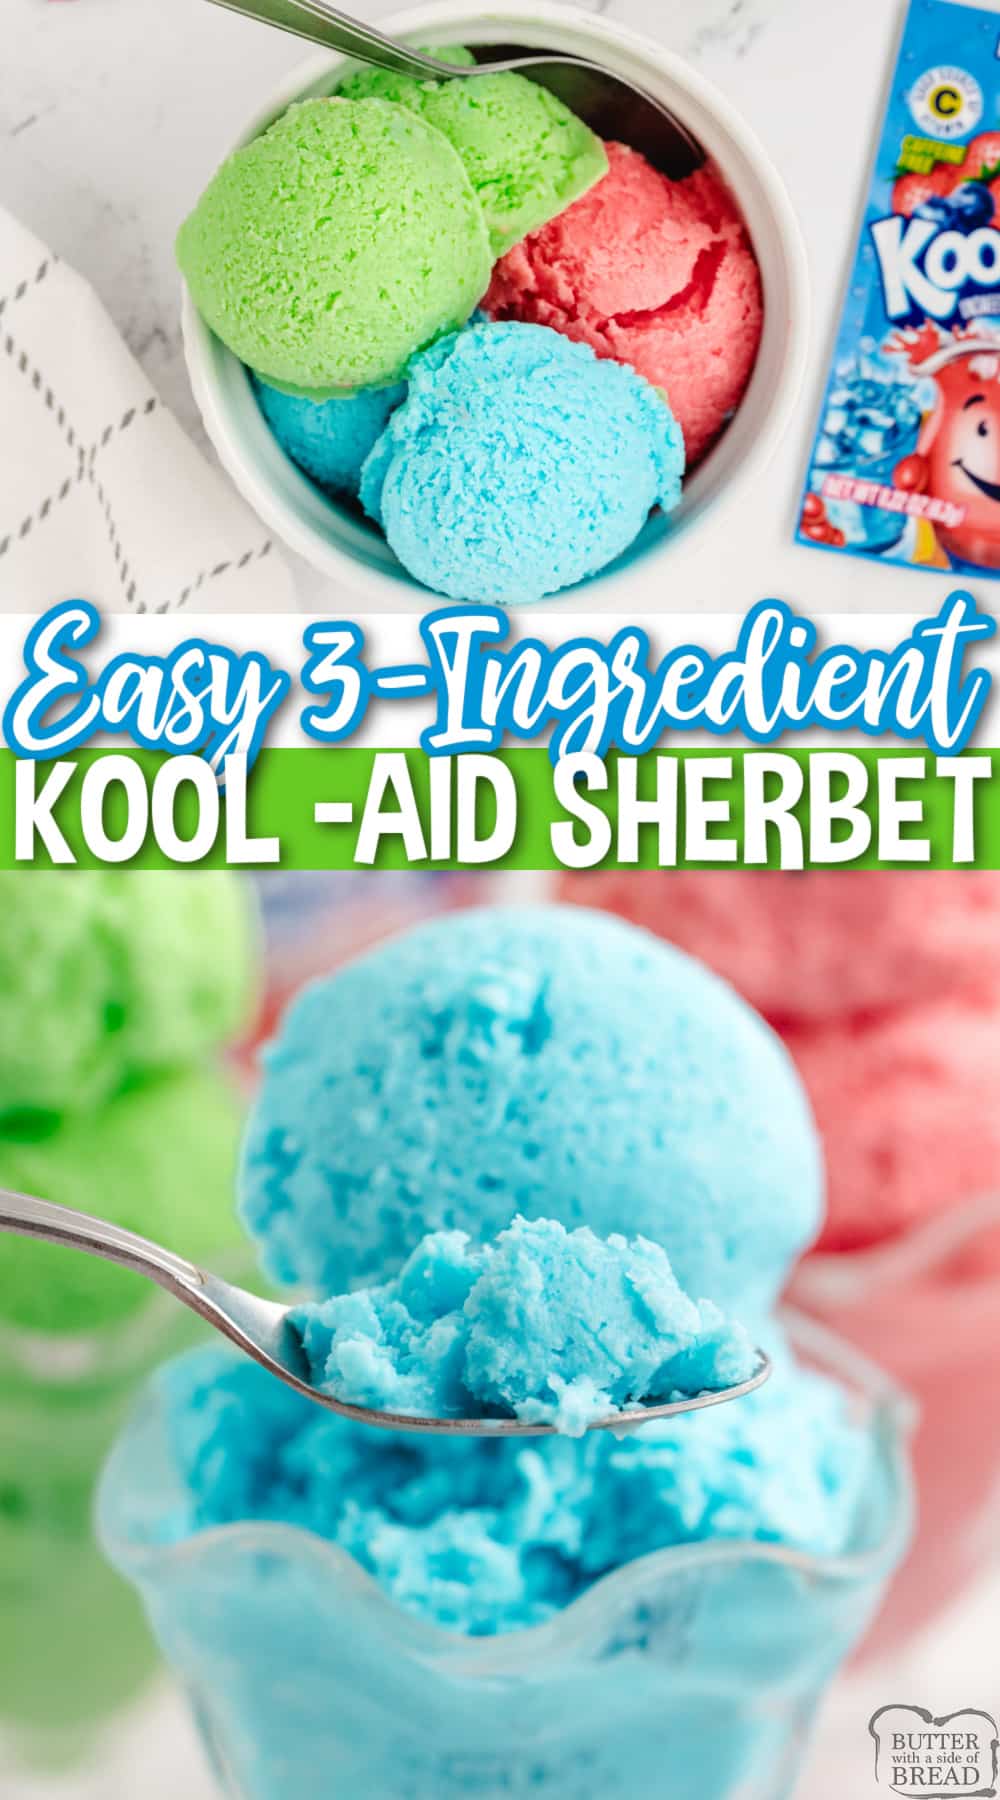 Easy Kool-Aid Sherbet is a delicious frozen treat that is made with only three simple ingredients, no ice cream maker required! With just a package of Kool-Aid mix, sugar, and milk, you can create a delicious and creamy sherbet in any flavor you desire.